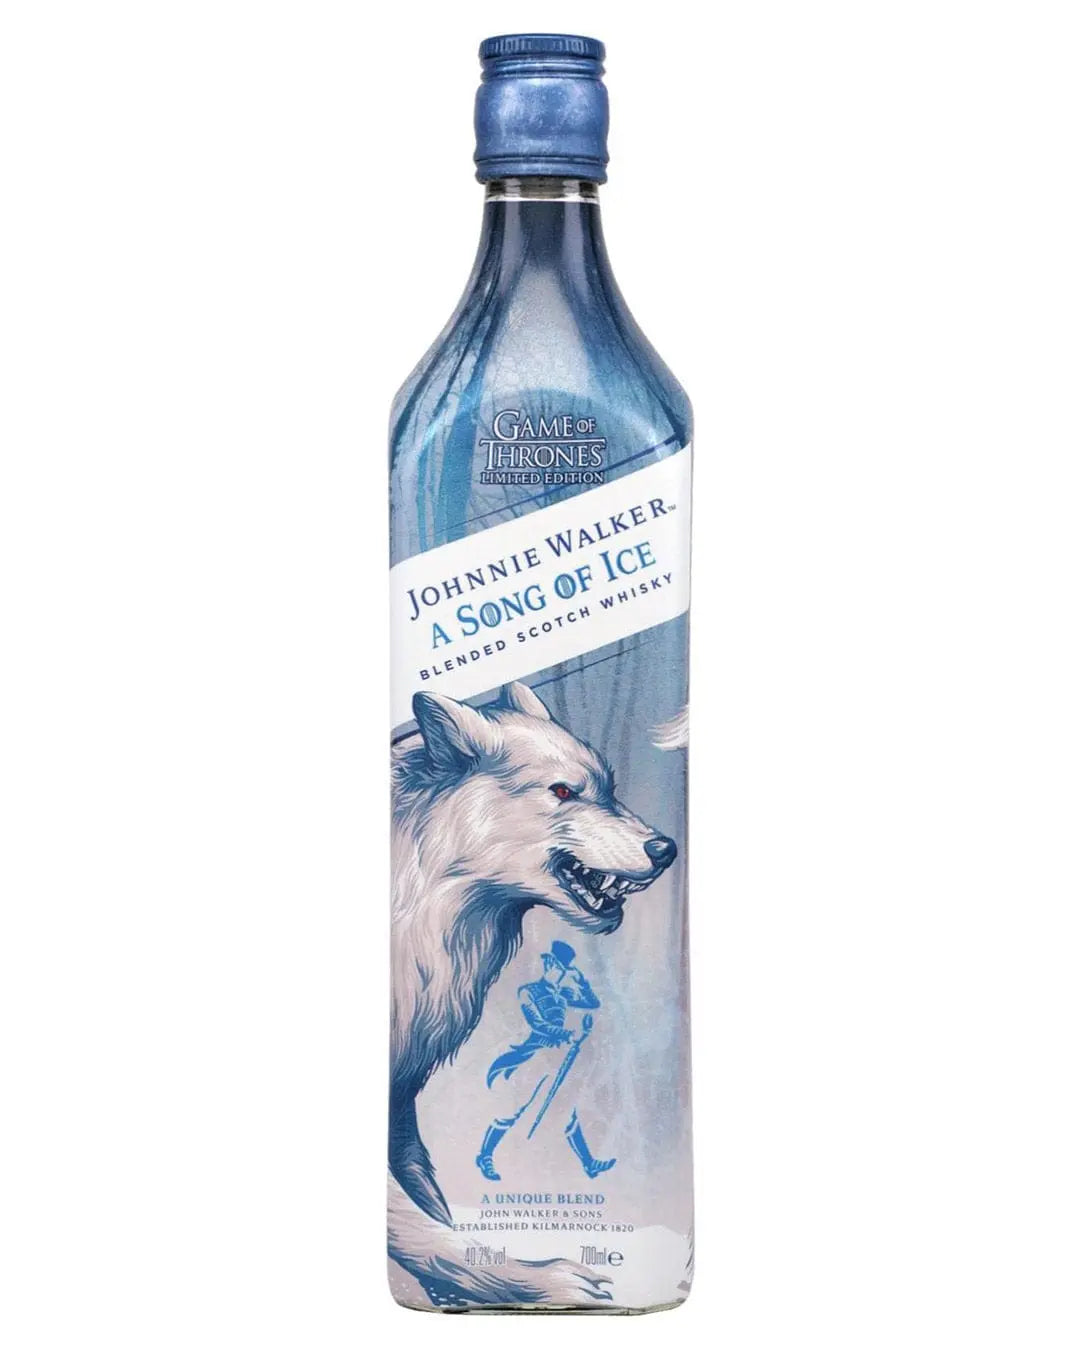 Johnnie Walker Song of Ice (Game of Thrones) Whisky, 70 cl Whisky 088076184121